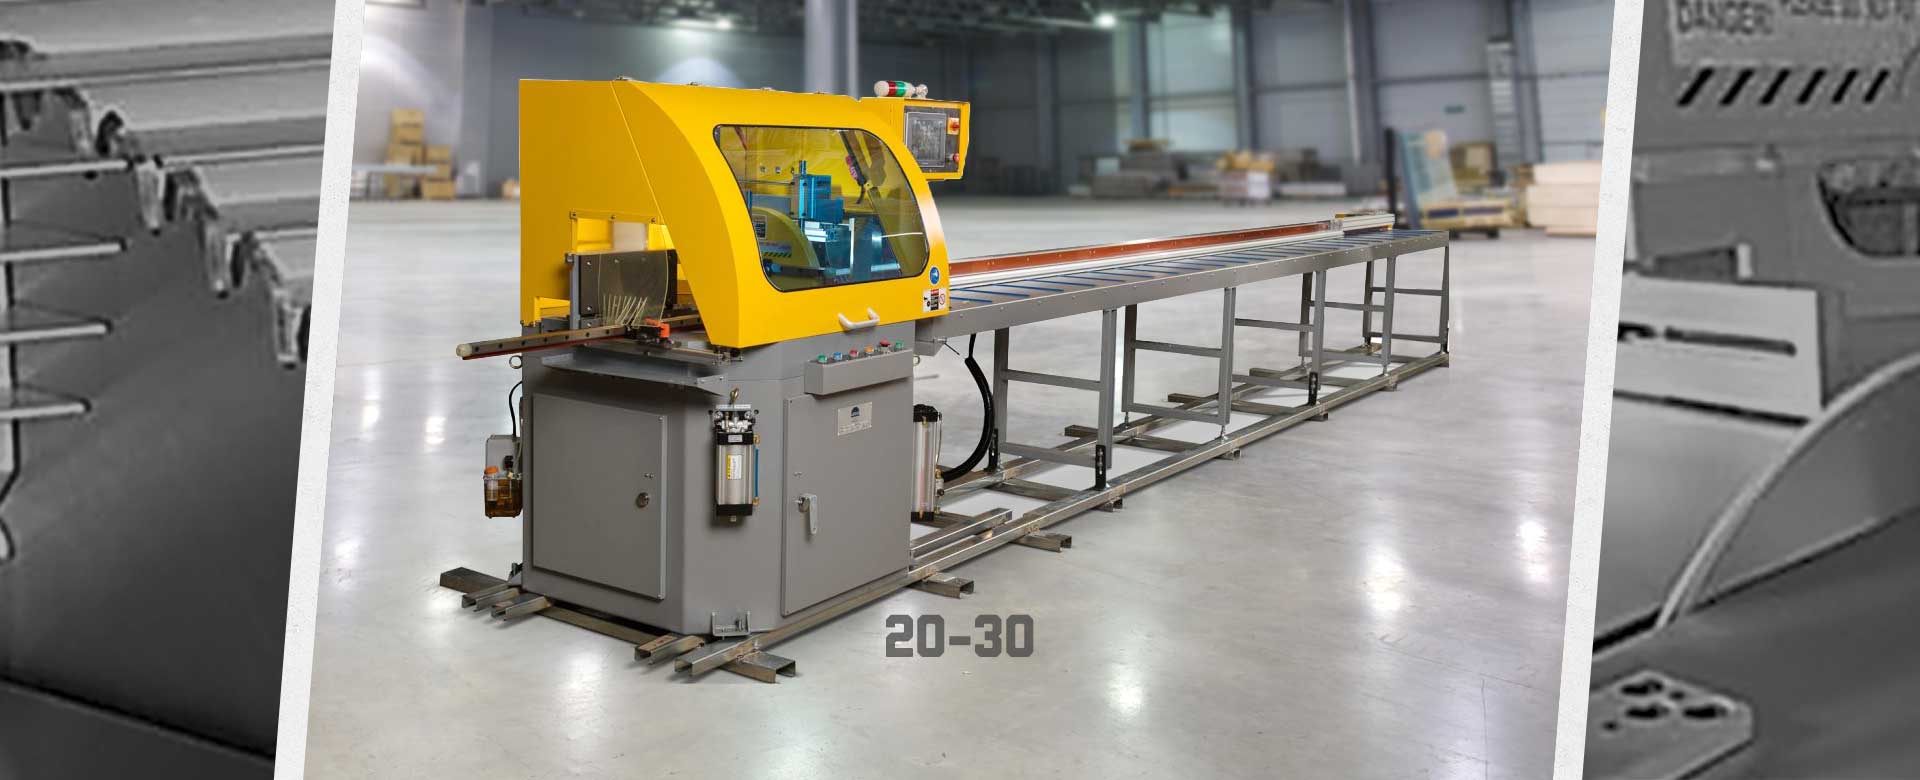 Gulf States Saw & Machine Co. offers automatic circular upcut saws from PMI, such as the PMI-20 30, in multiple models and configurations.